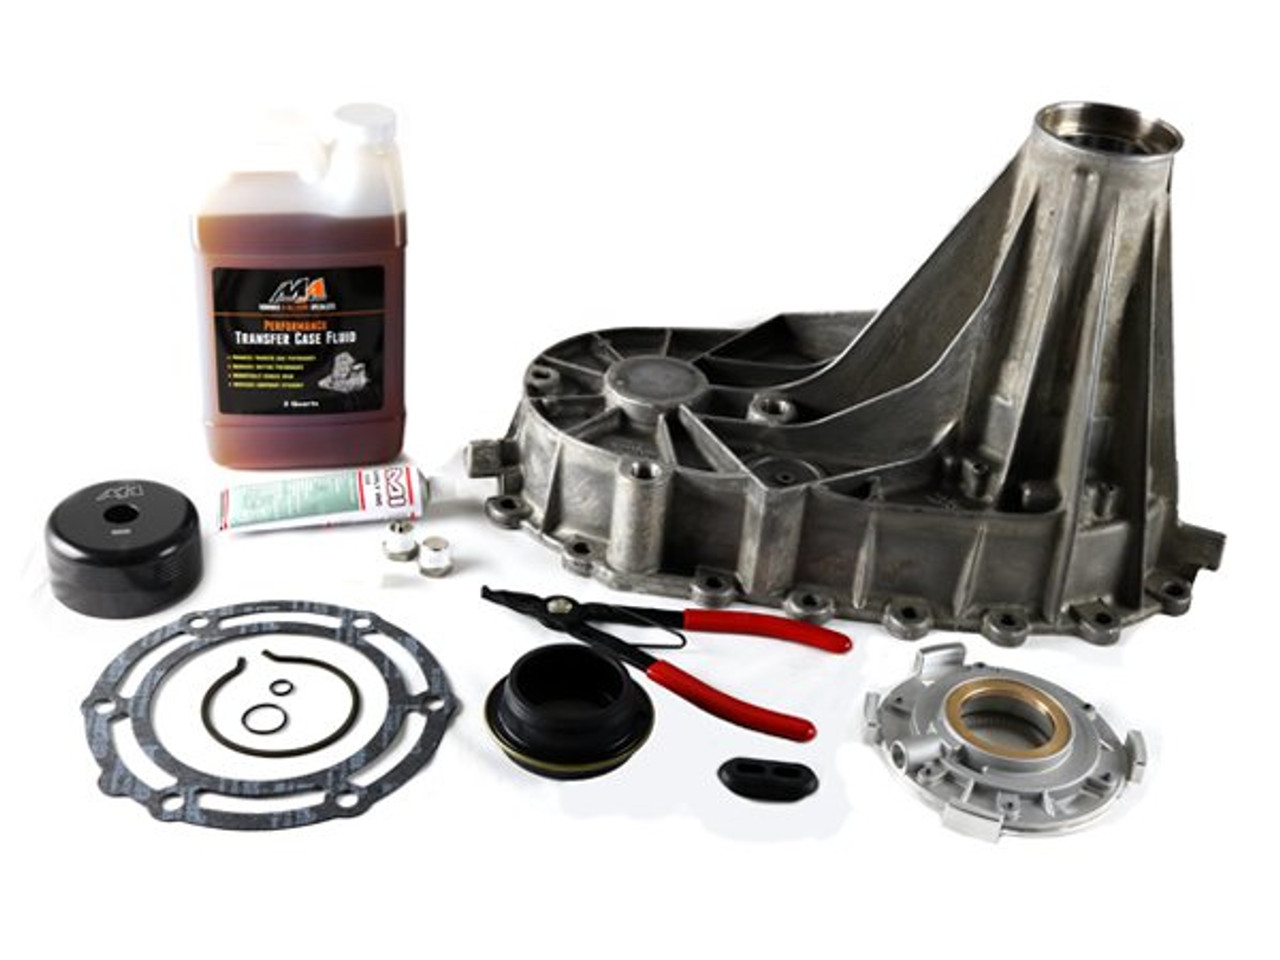 Transfer Case Pump Upgrade Combo with 10695 Seal Driver and Pump, LB7/LLY/LBZ, 2001-2007